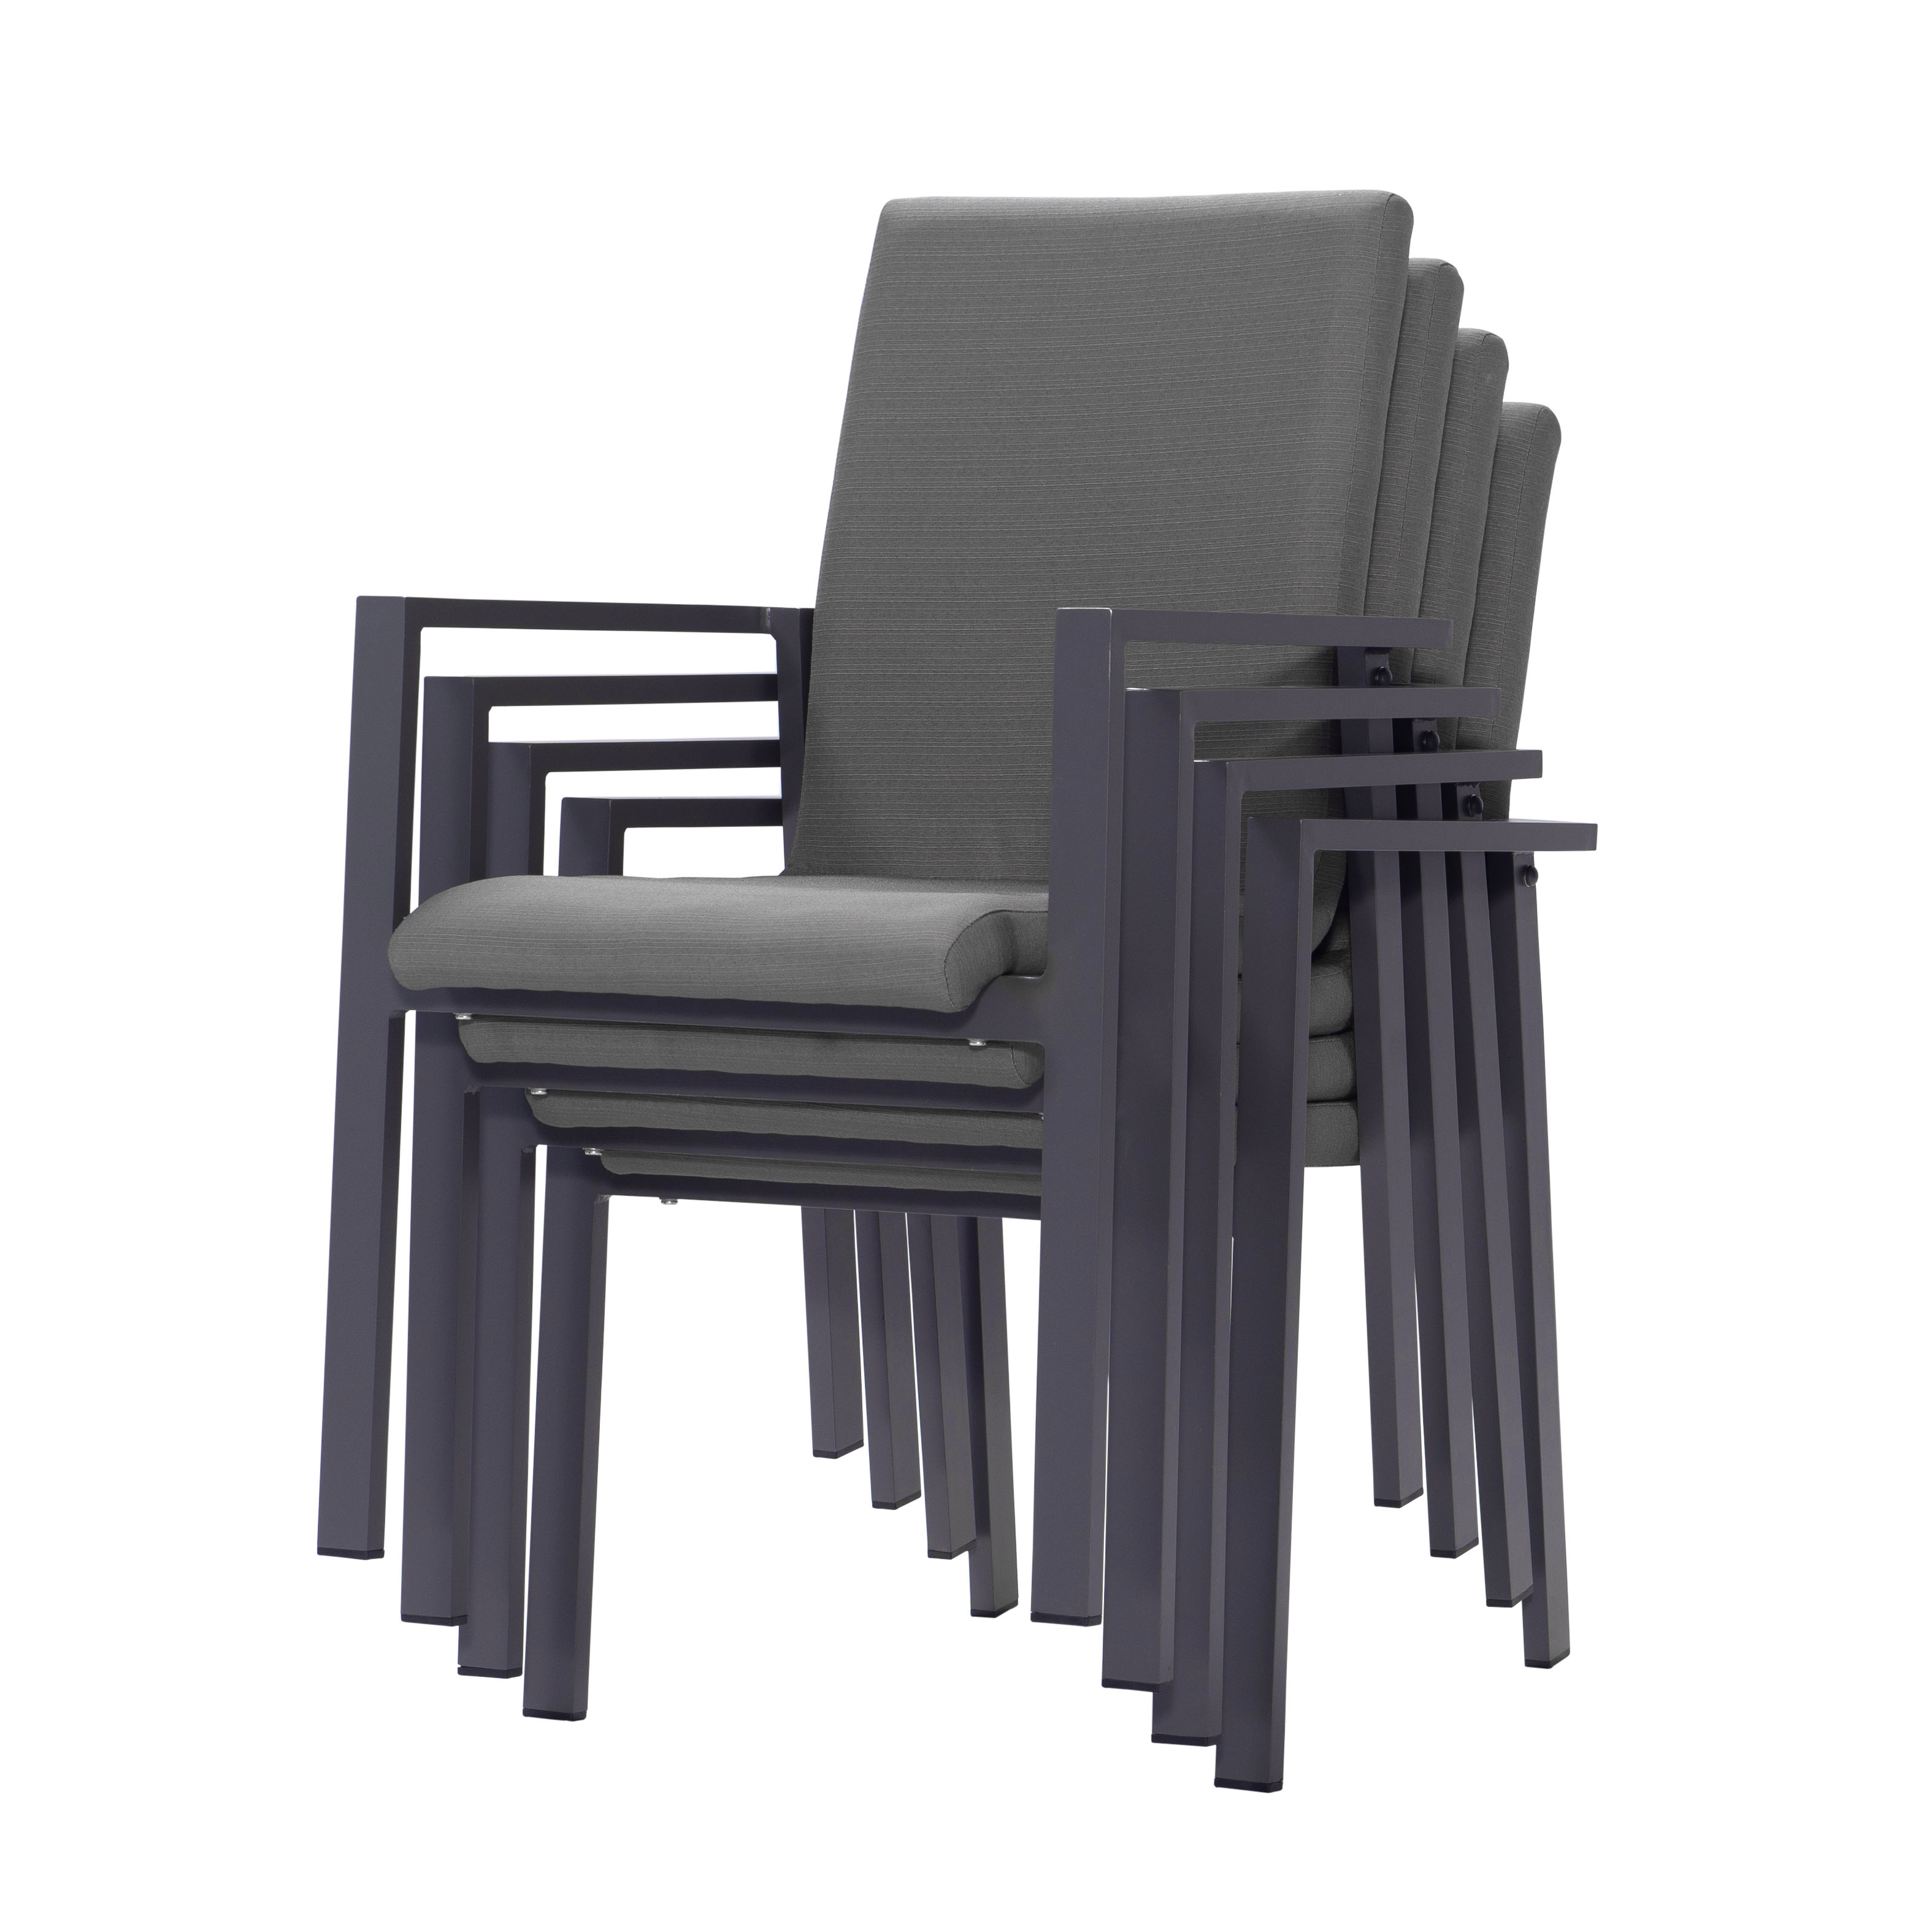 Louis dining chair S4